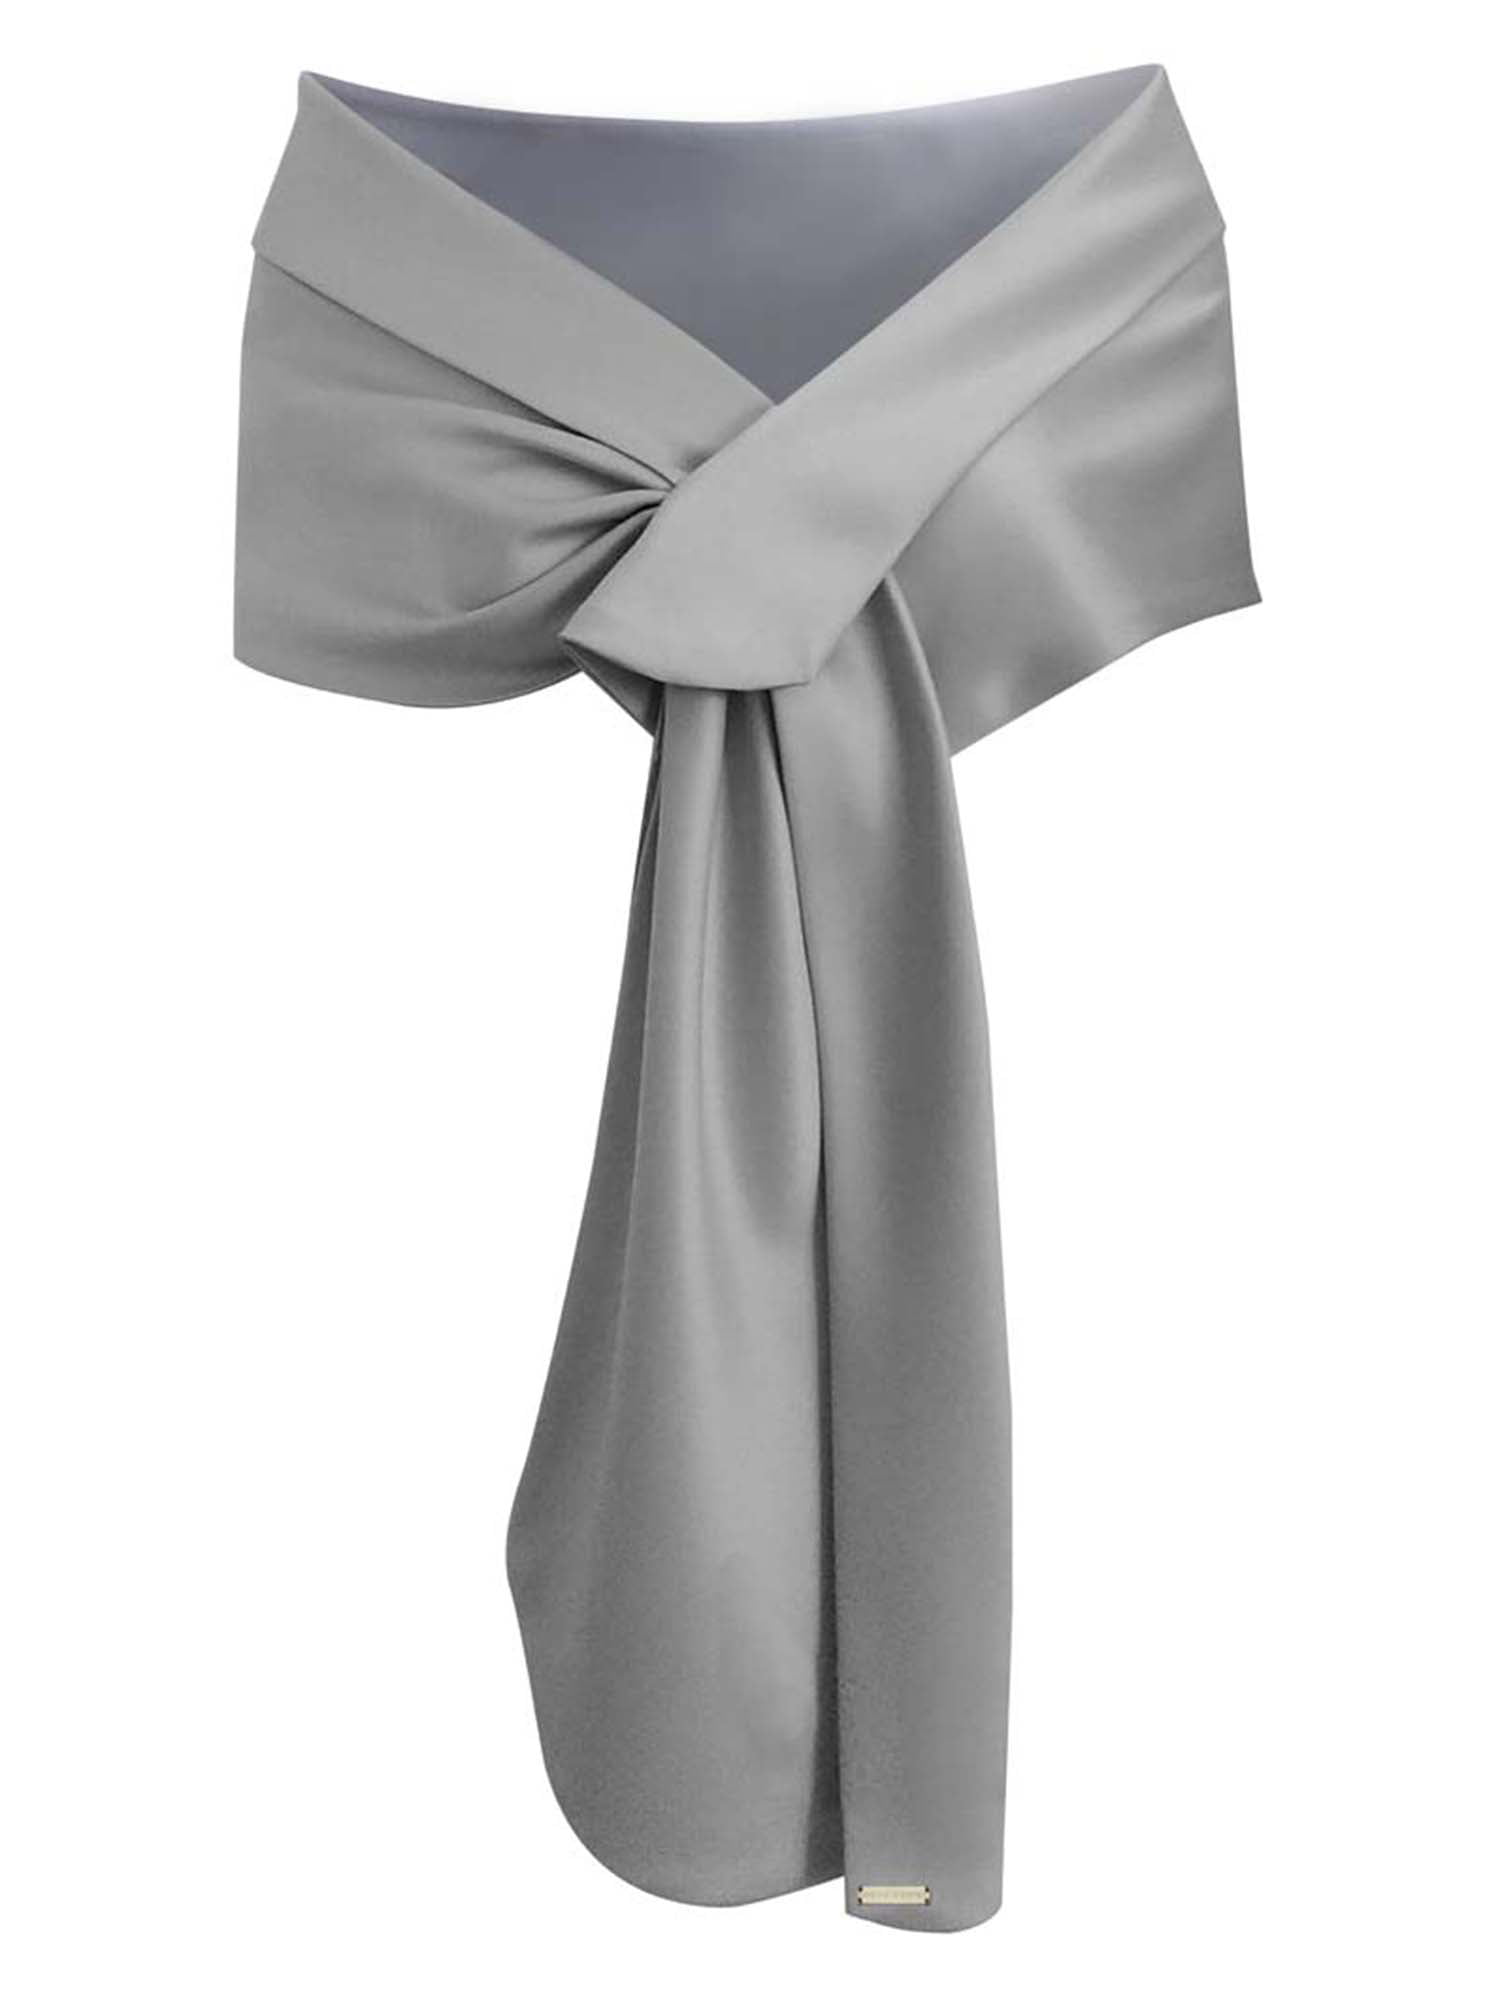 Pewter/mid grey shimmer organza wrap/stole for bridemaids/ evening wear/ prom 